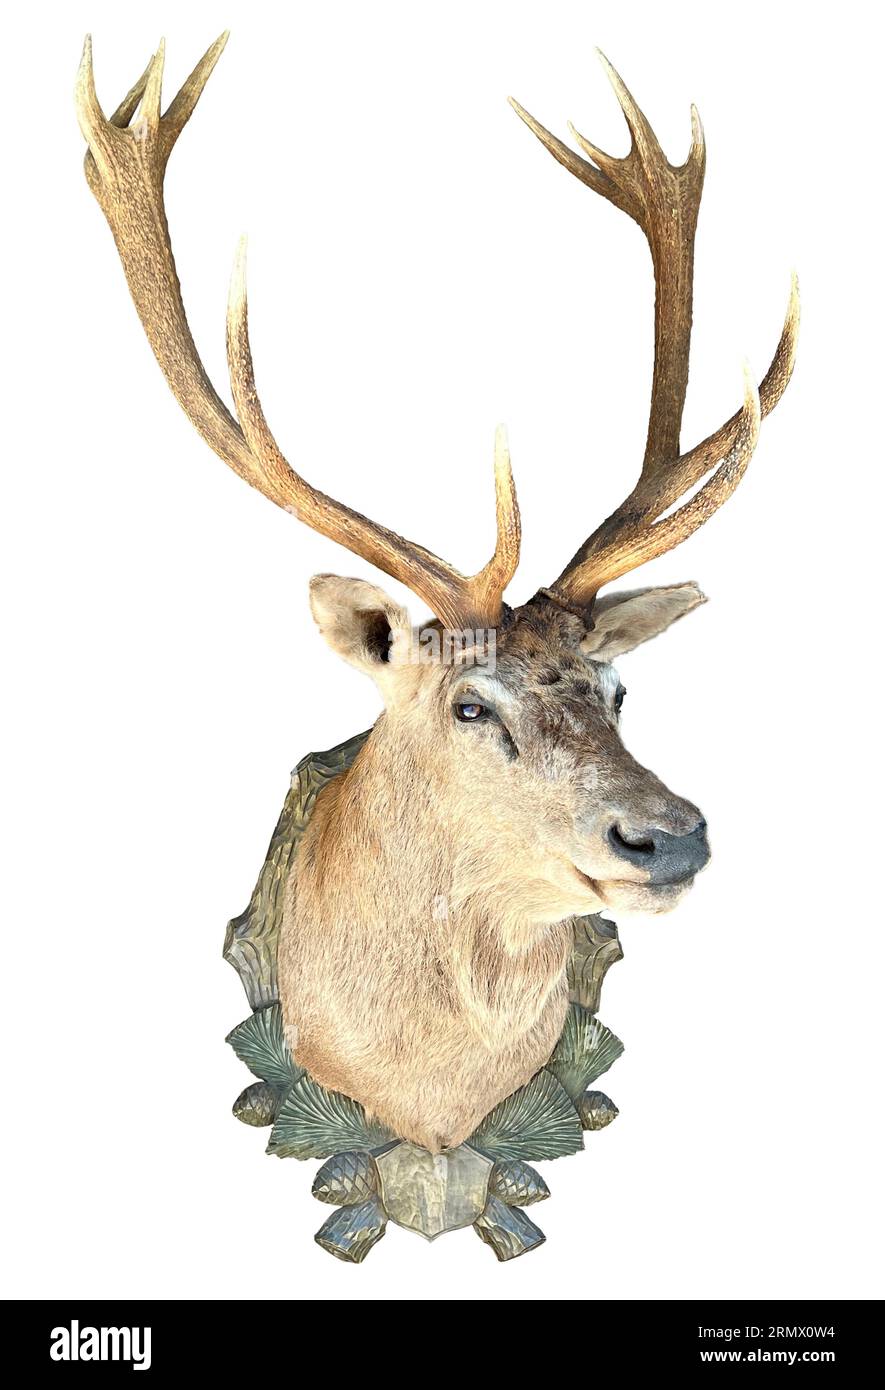 Stuffed red deer, stag head with antlers (Cervus elaphus) on a wooden plate isolated on white background. Stock Photo